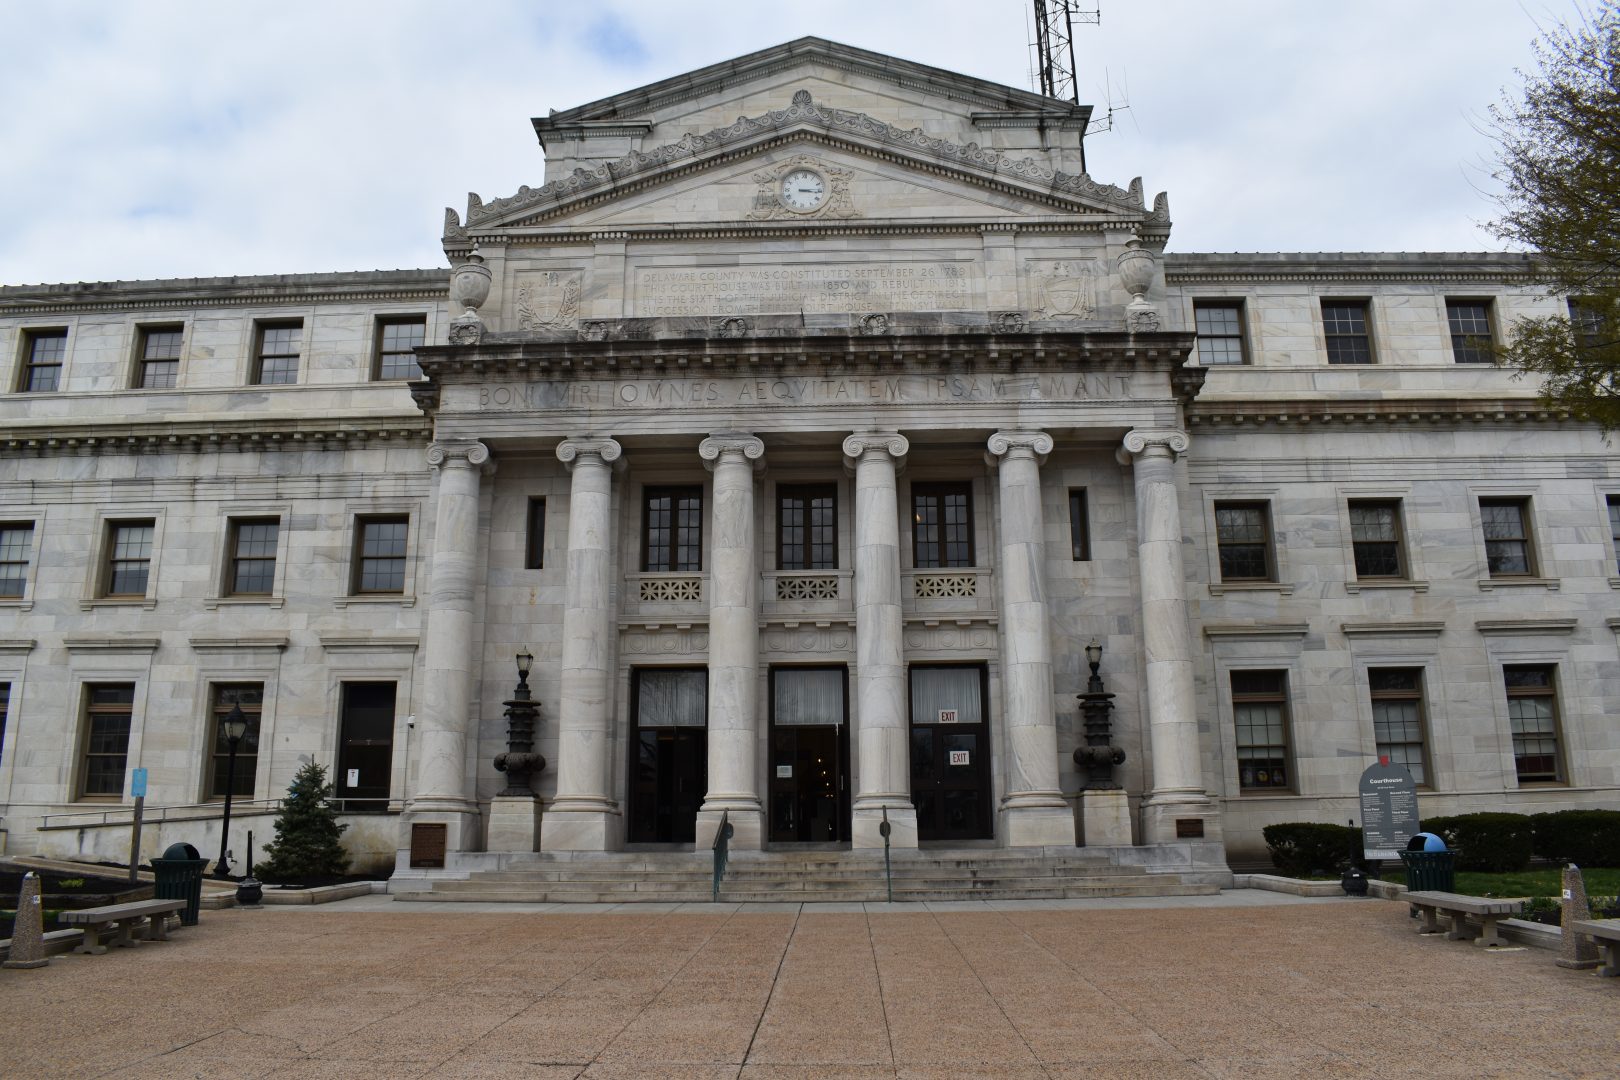 The Delaware County courthouse in Media is seen on April 11, 2019.